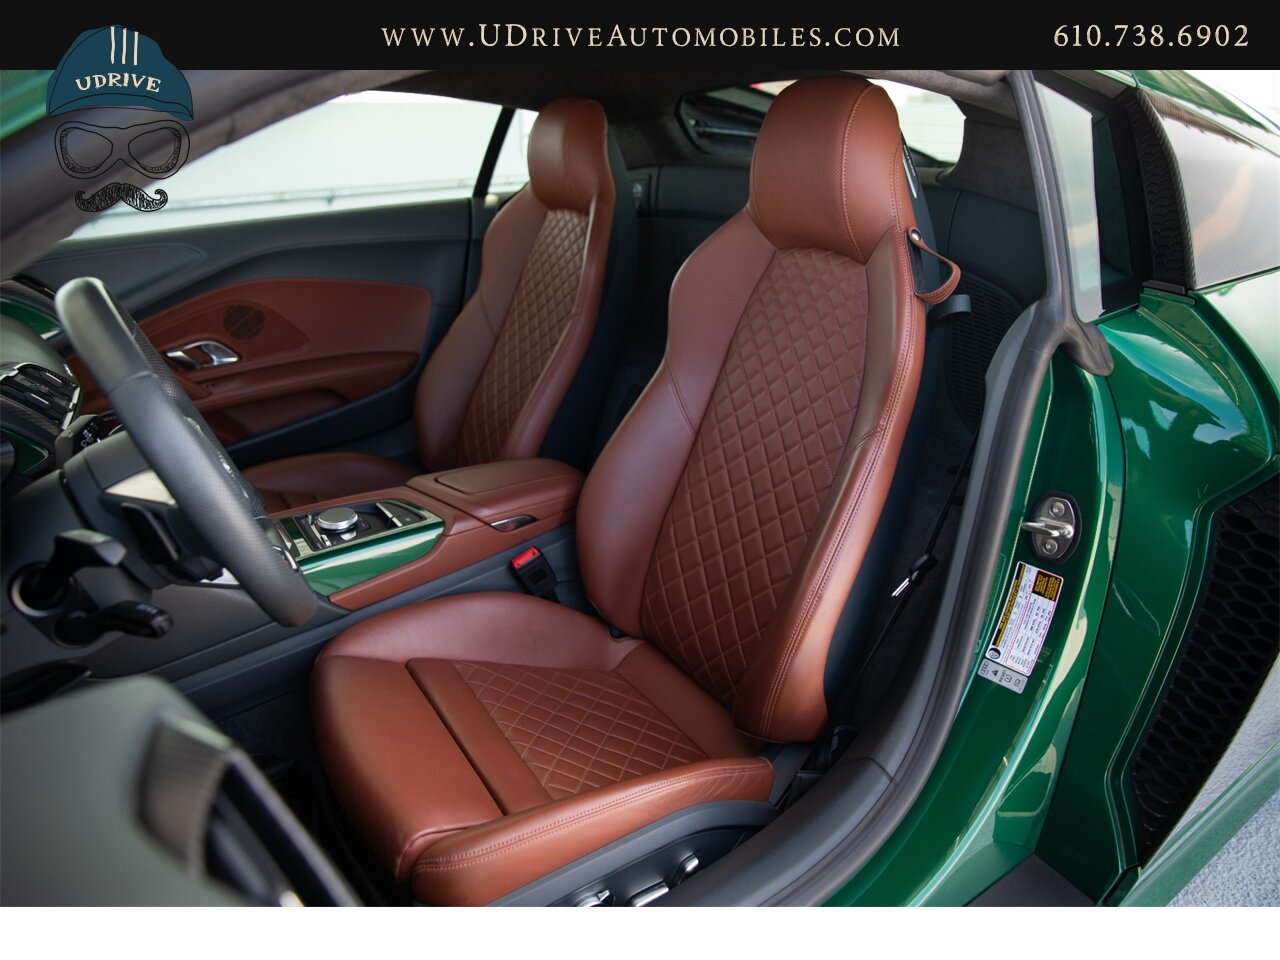 2017 Audi R8 Audi Exclusive Avocado Green Vermont Brown Leather  Diamond Stitching V10 Carbon Fiber - Photo 33 - West Chester, PA 19382